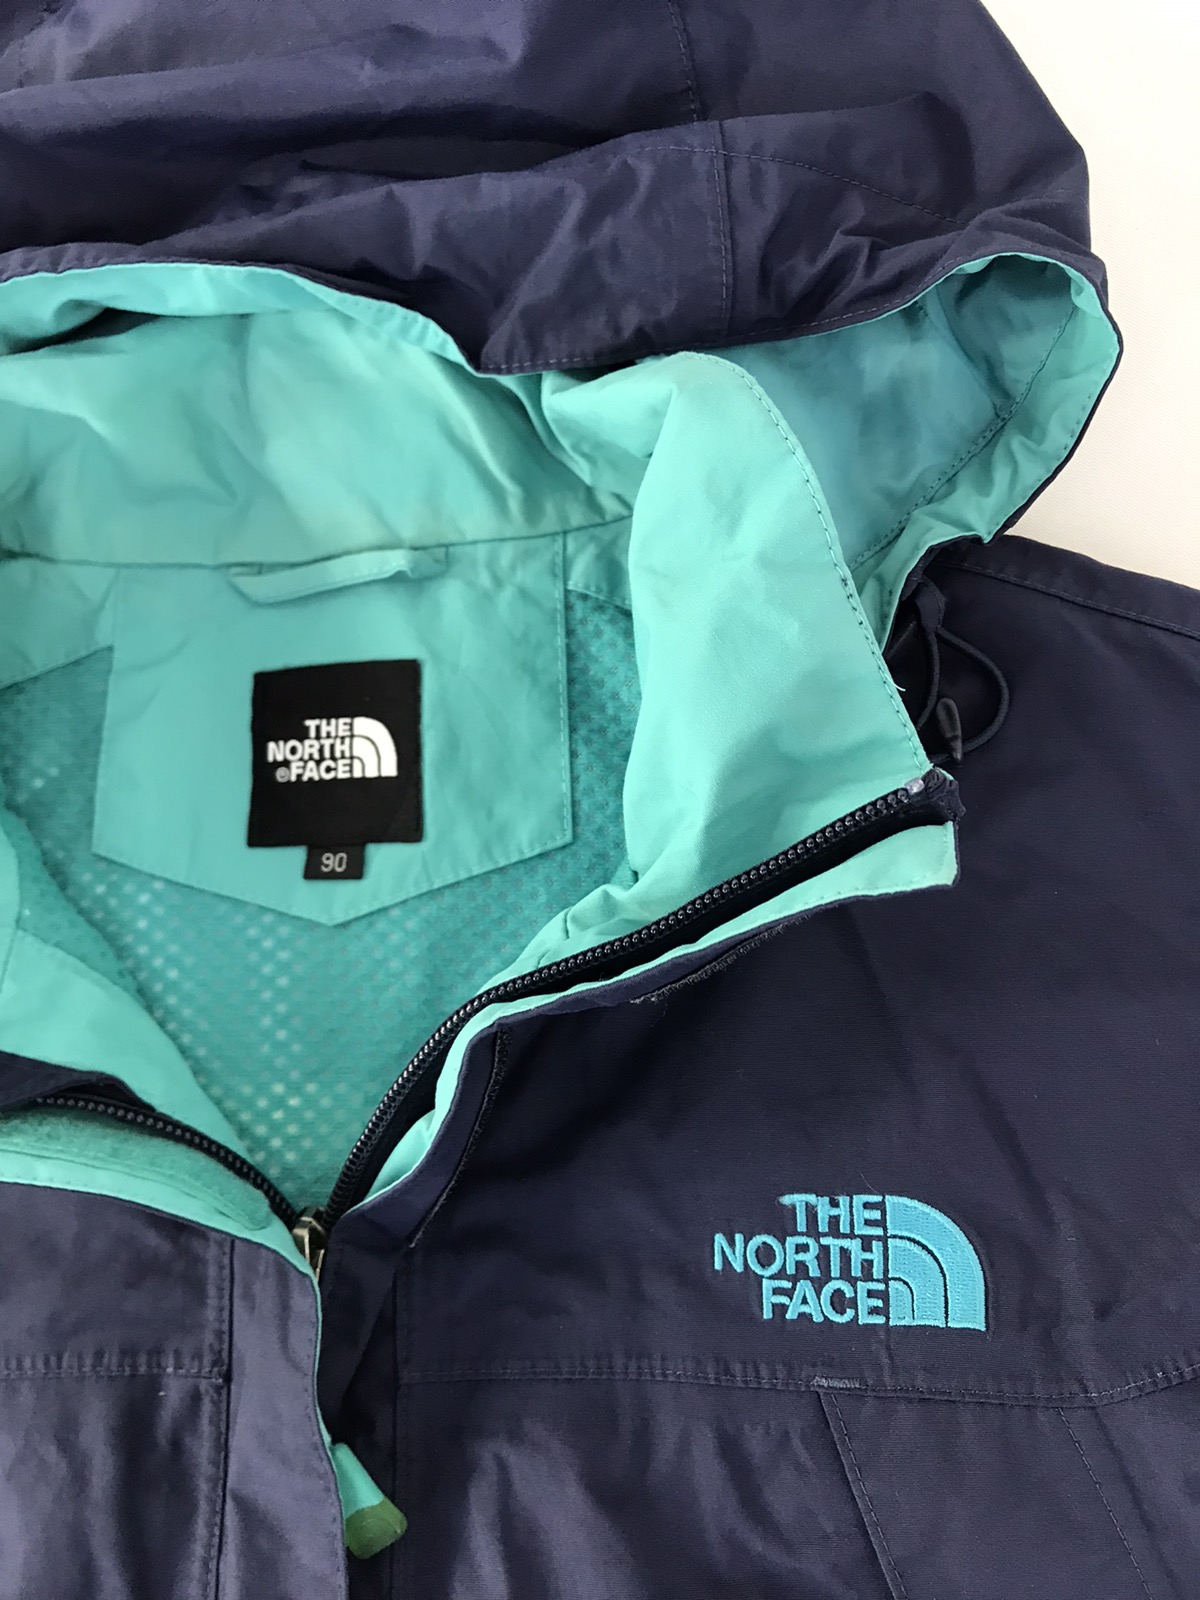 The North Face Quilted Jacket Zipper Style Outdoor Hiking - 5